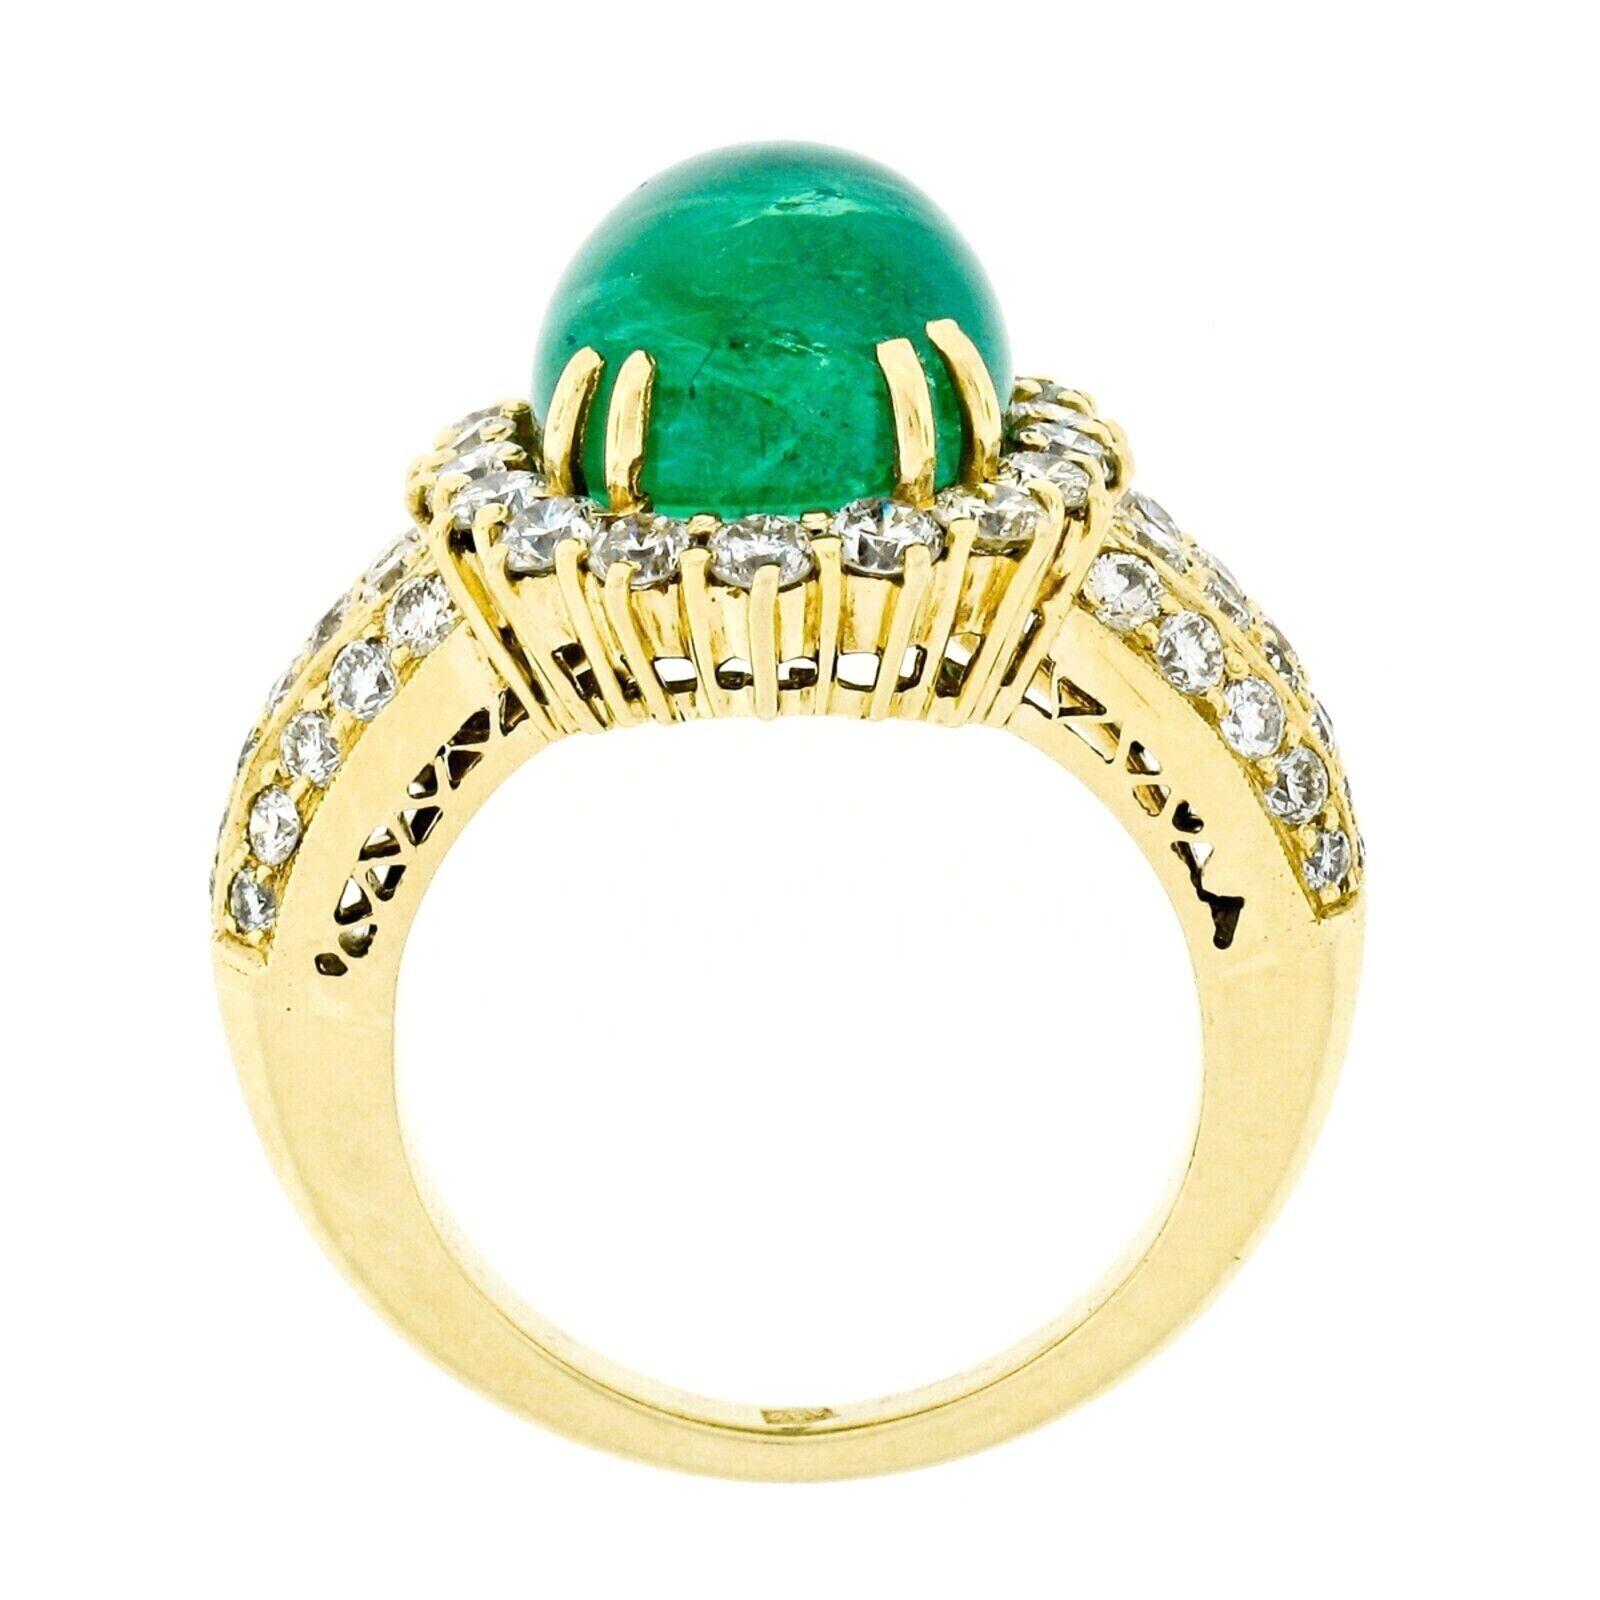 Vintage 18k Gold 8.58ct AGL Oval Cabochon Emerald and Pave Diamond Cocktail Ring For Sale 2